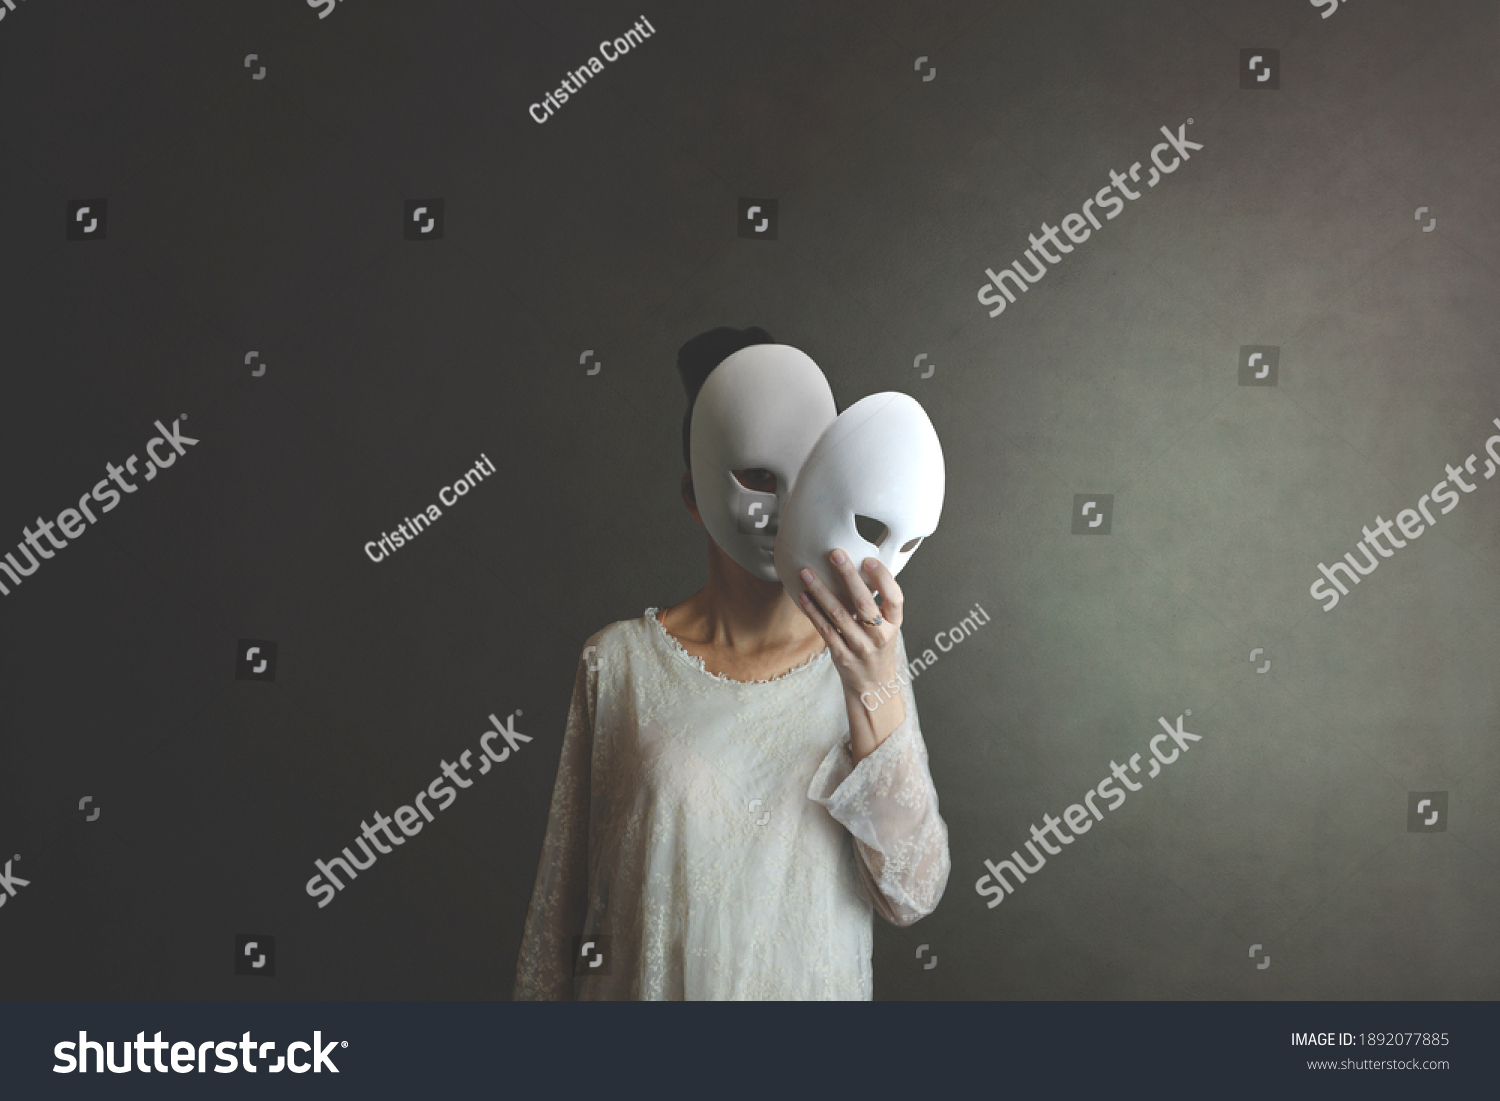 woman takes off the mask from her face but underneath her she has another mask, concept of hiding one's soul and oneself #1892077885